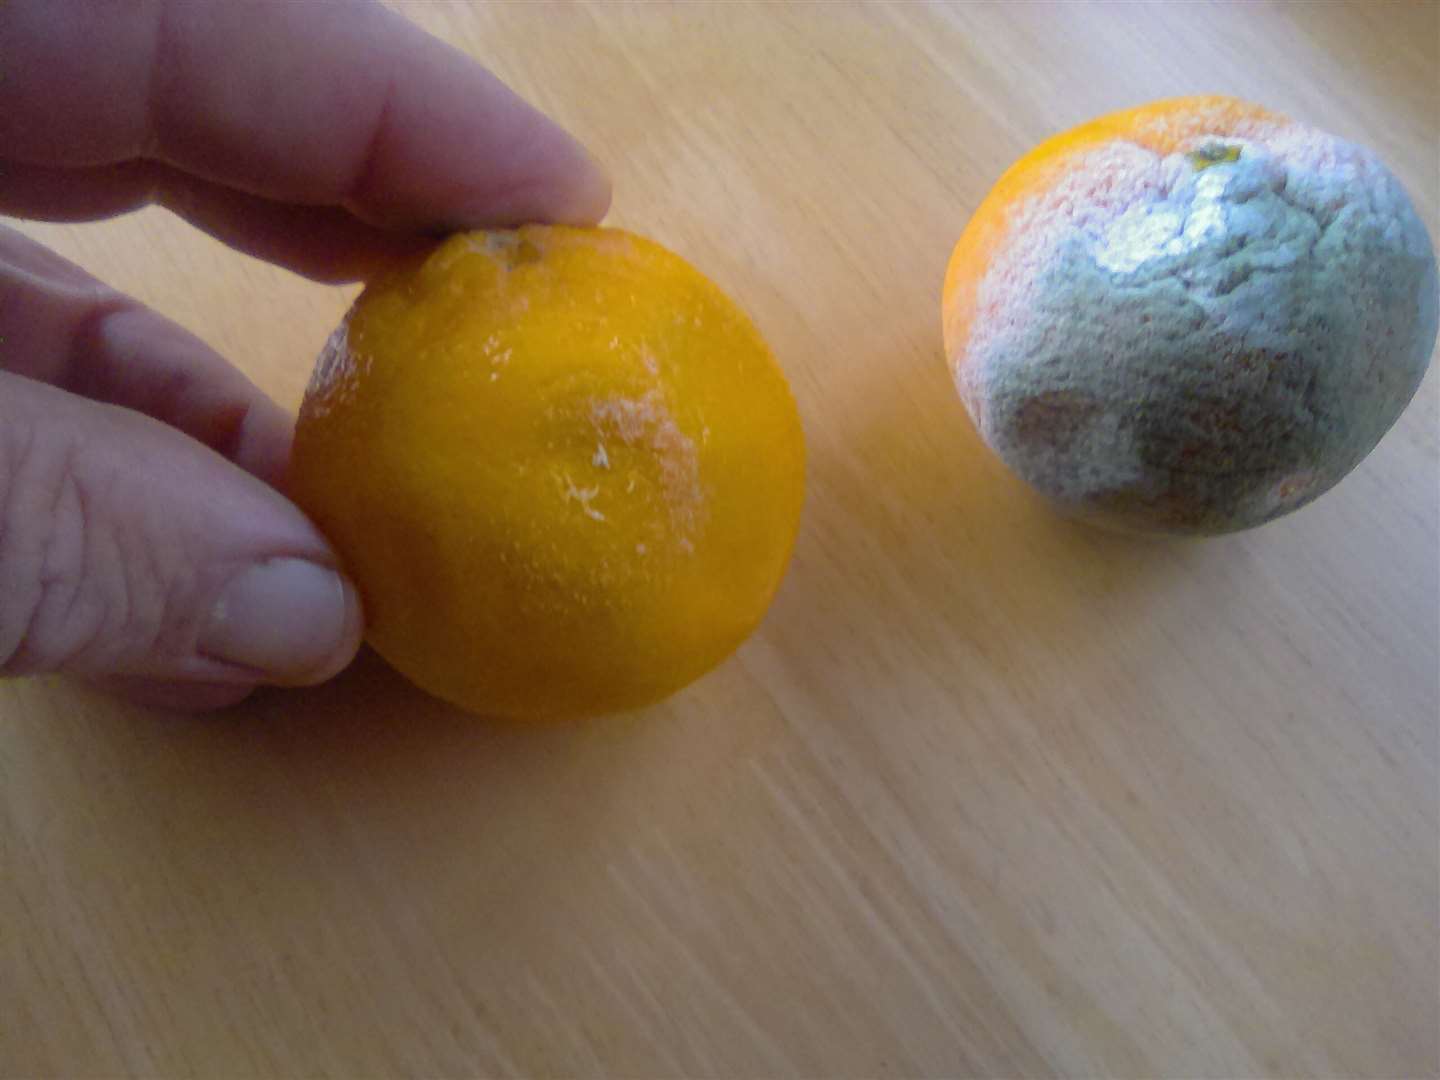 Some fruit has allegedly arrived mouldy or past its expiration date